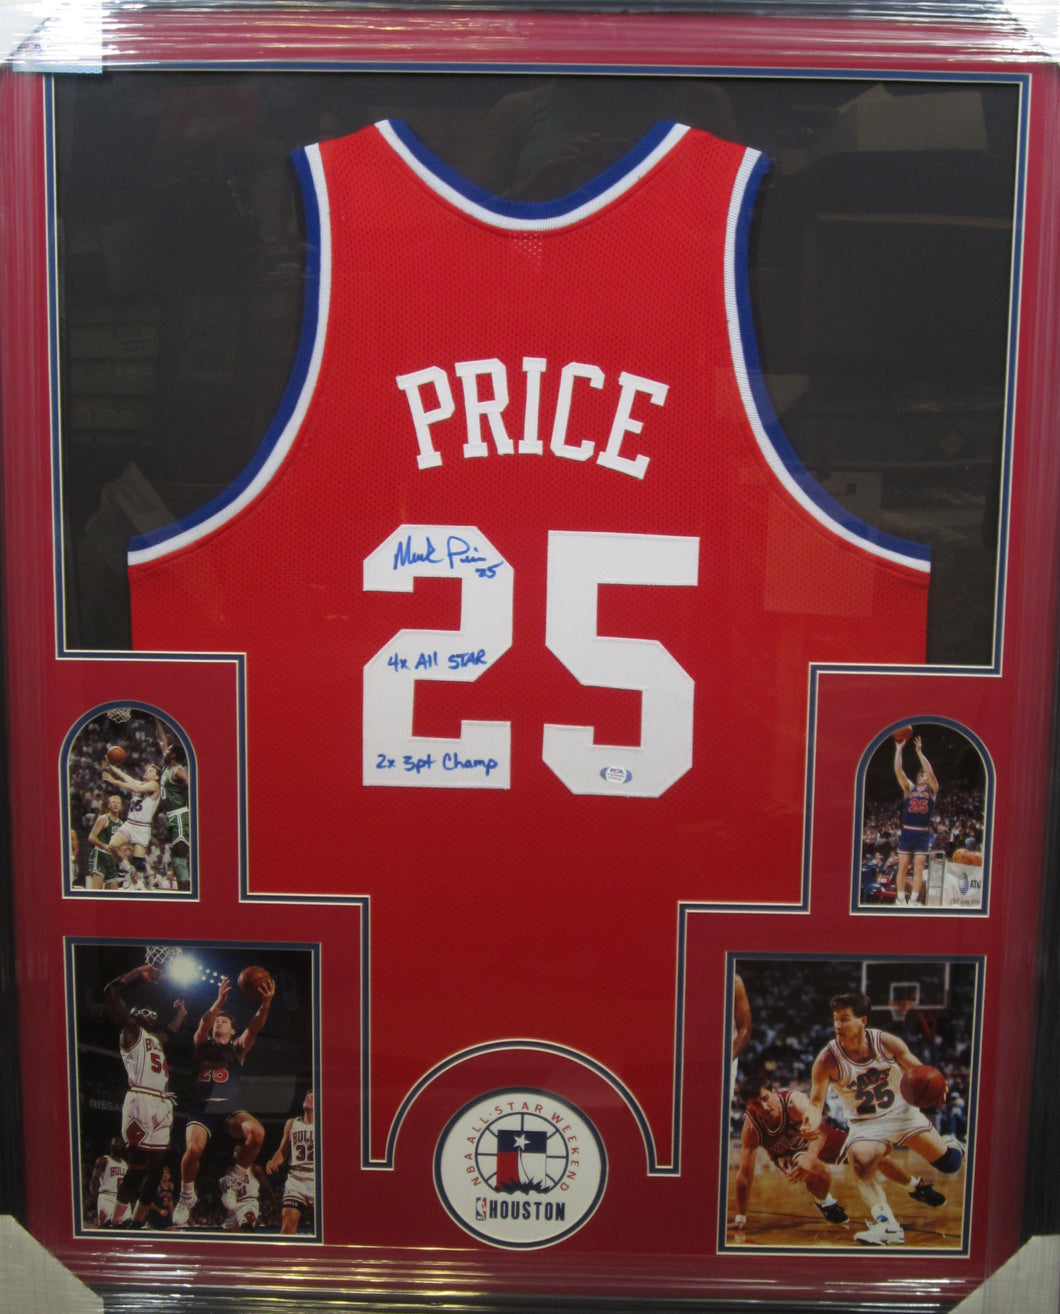 Houston NBA All-Star Mark Price Signed Jersey with 4x All Star & 2x 3pt Champ Inscriptions Framed & Matted with PSA COA